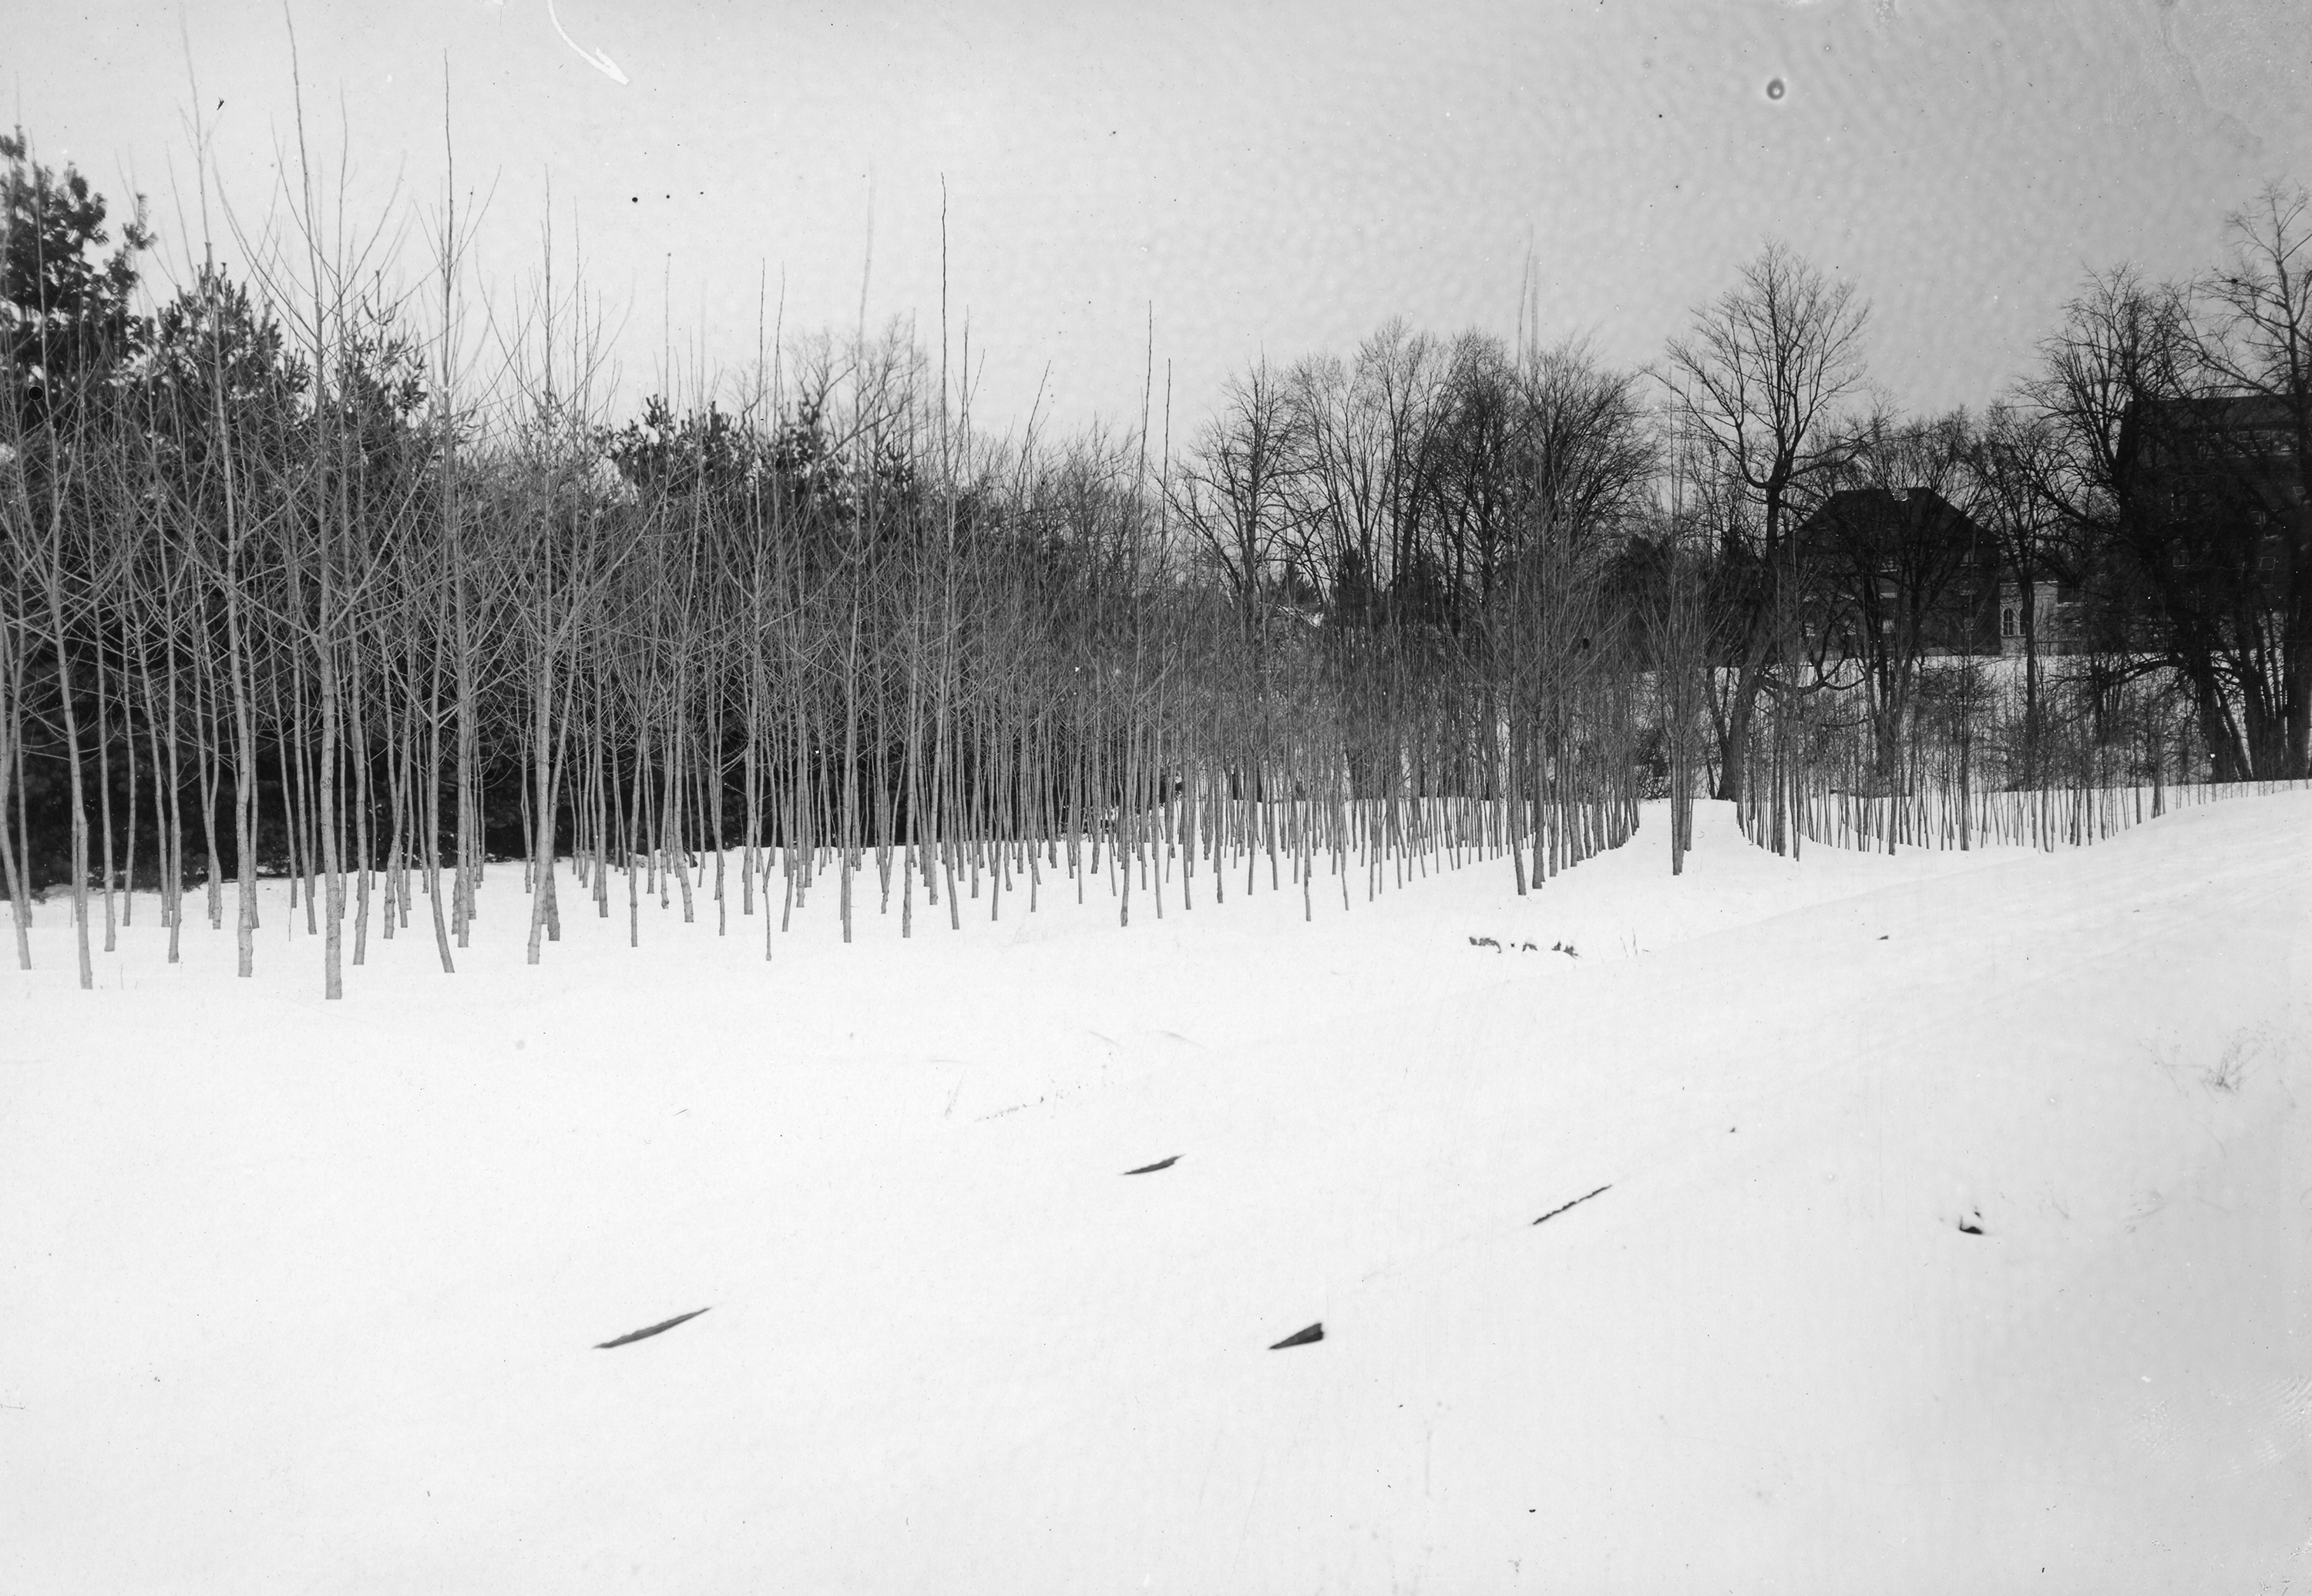 Forestry Plats in Winter, undated